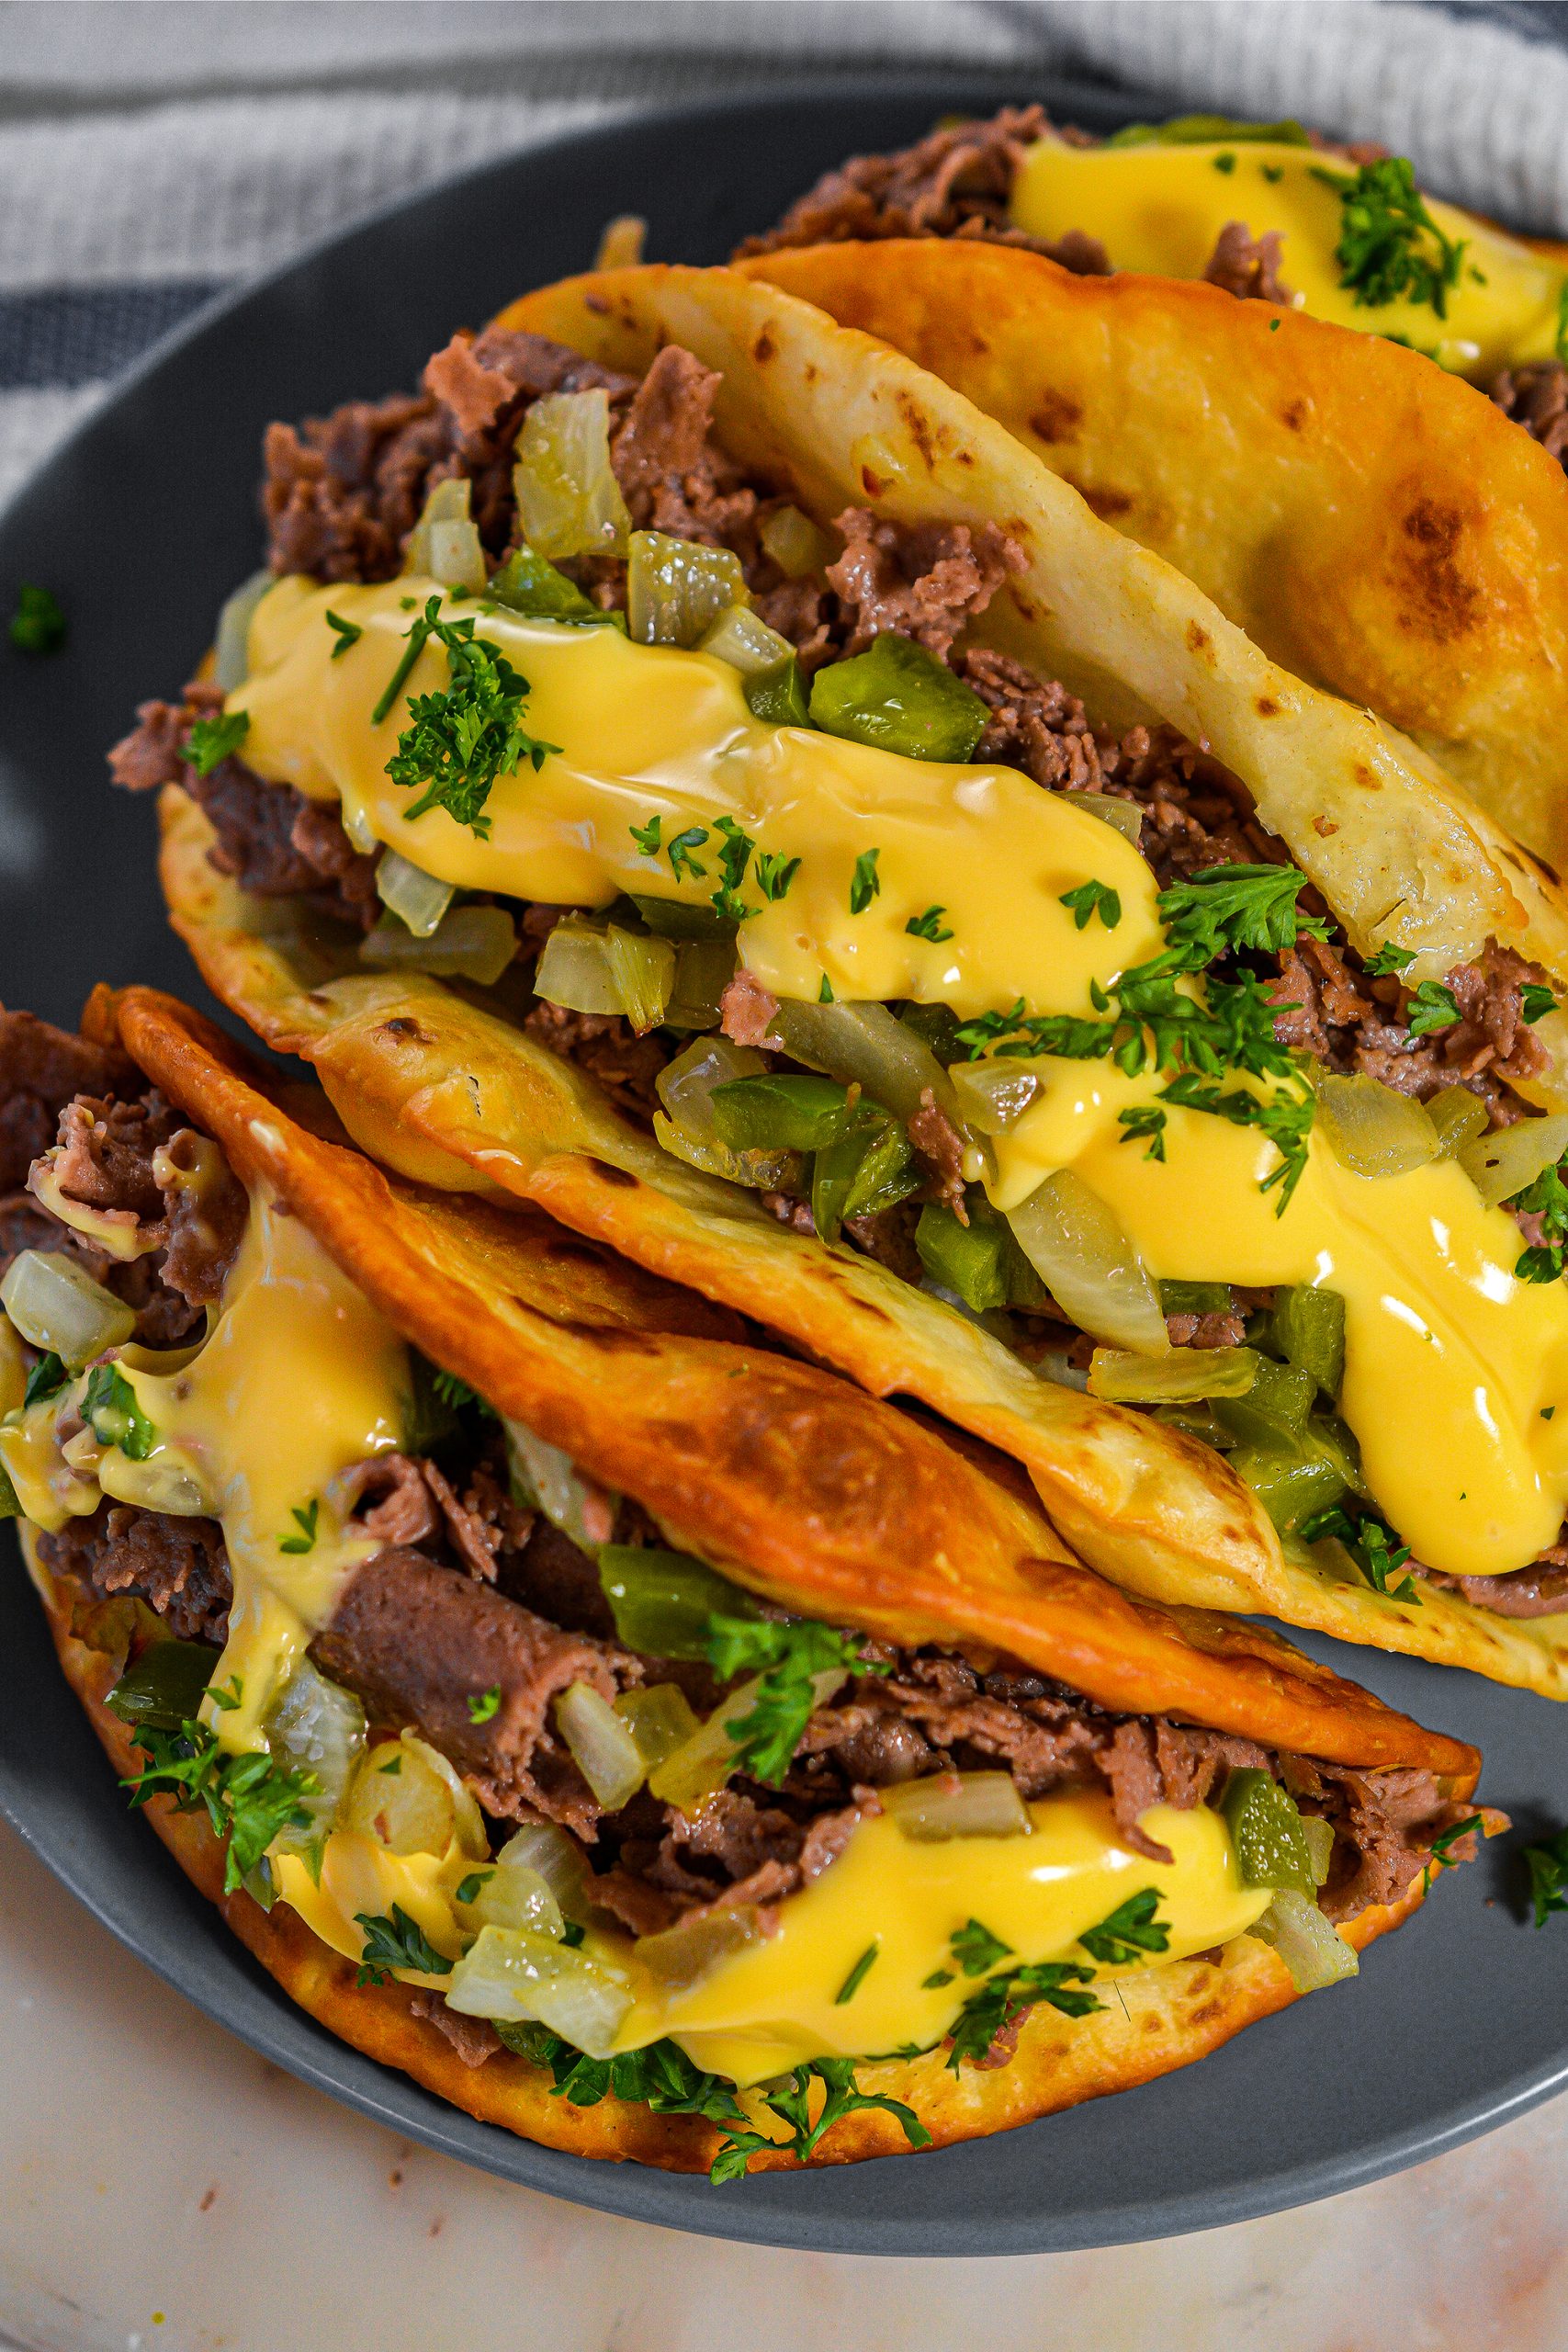 philly cheesesteak tacos, philly cheese steak tacos, cheese steak tacos